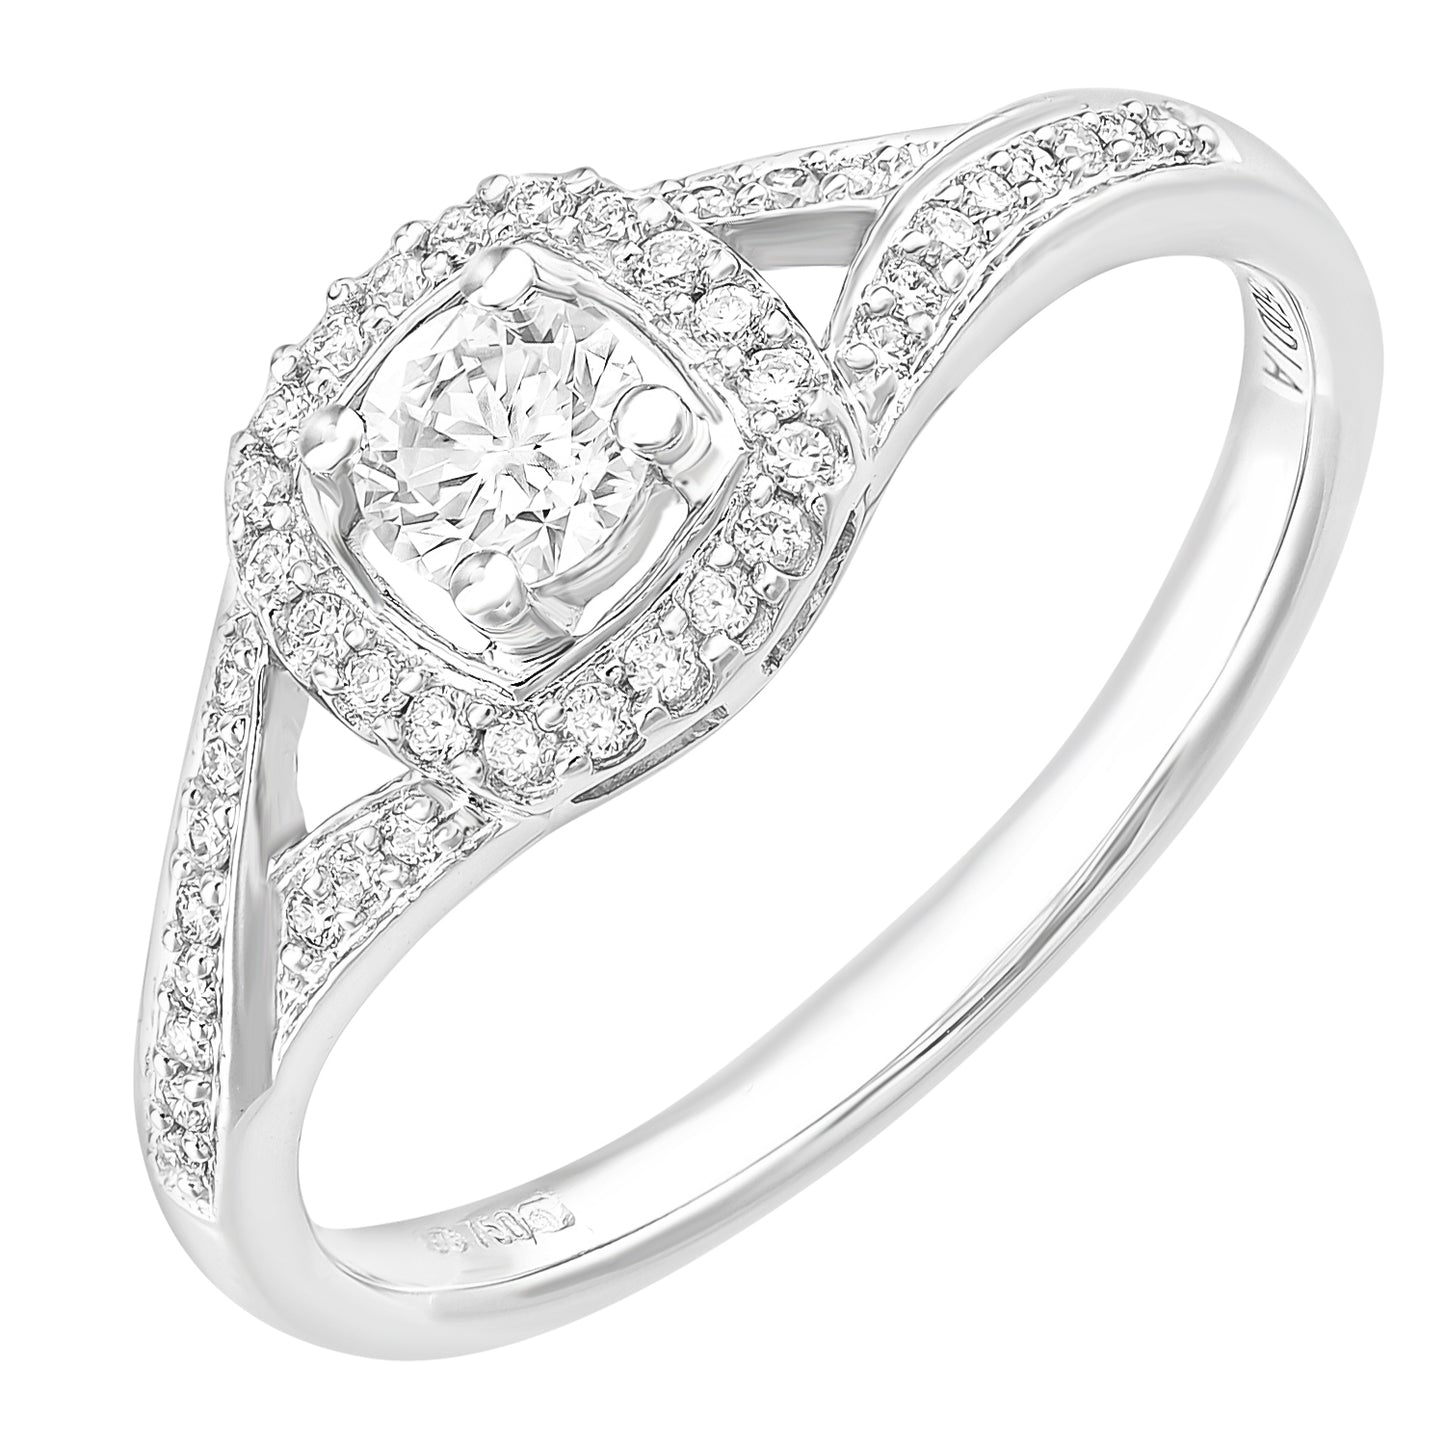 18ct White Gold  22pts Diamond 18pts Pave Halo Solitaire Ring - PR1AXL2334W18